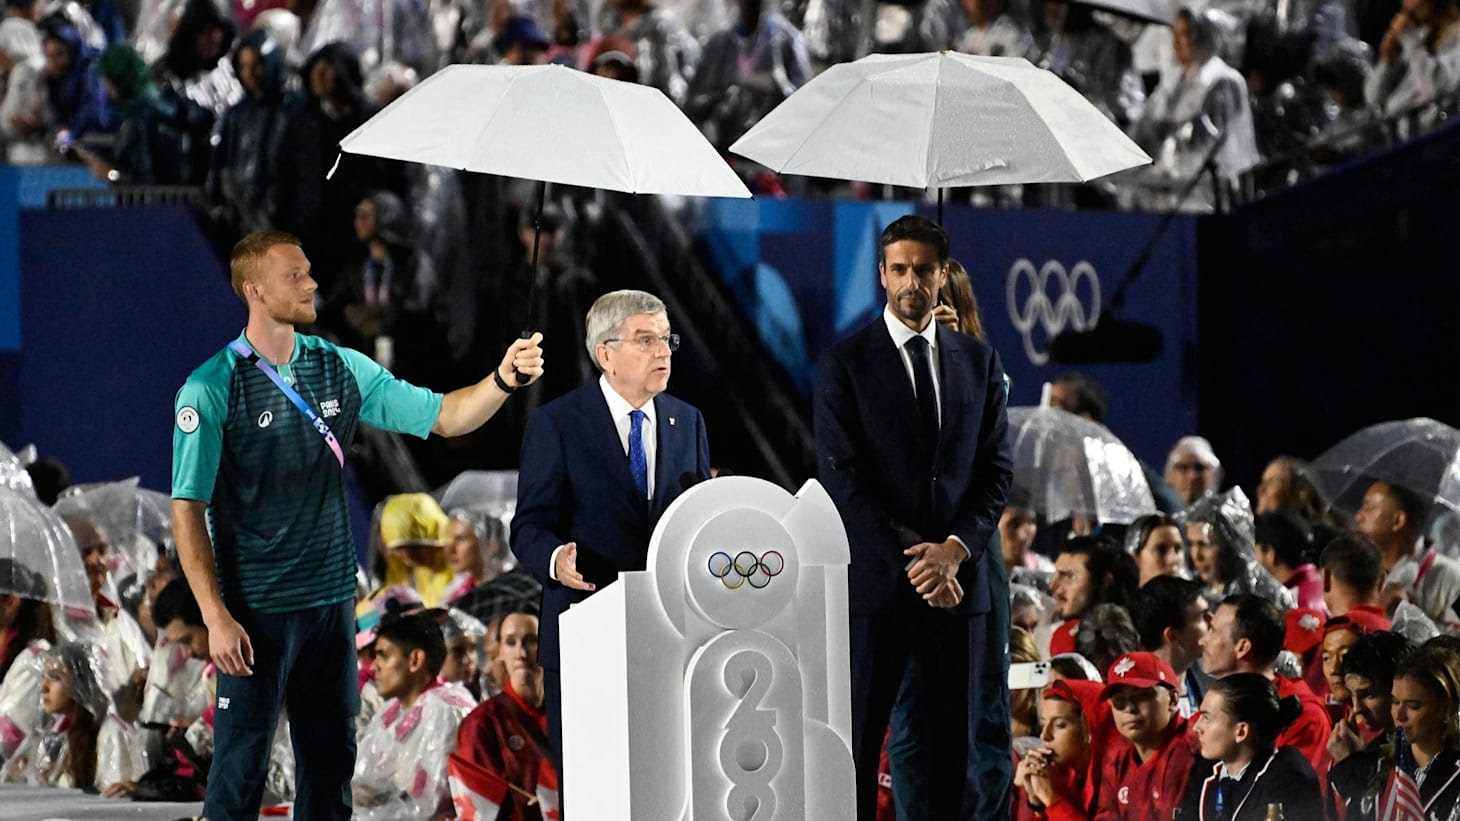 IOC President Thomas Bach Ushers in Paris 2024 Olympic Games with a Call for Unity and Inspiration